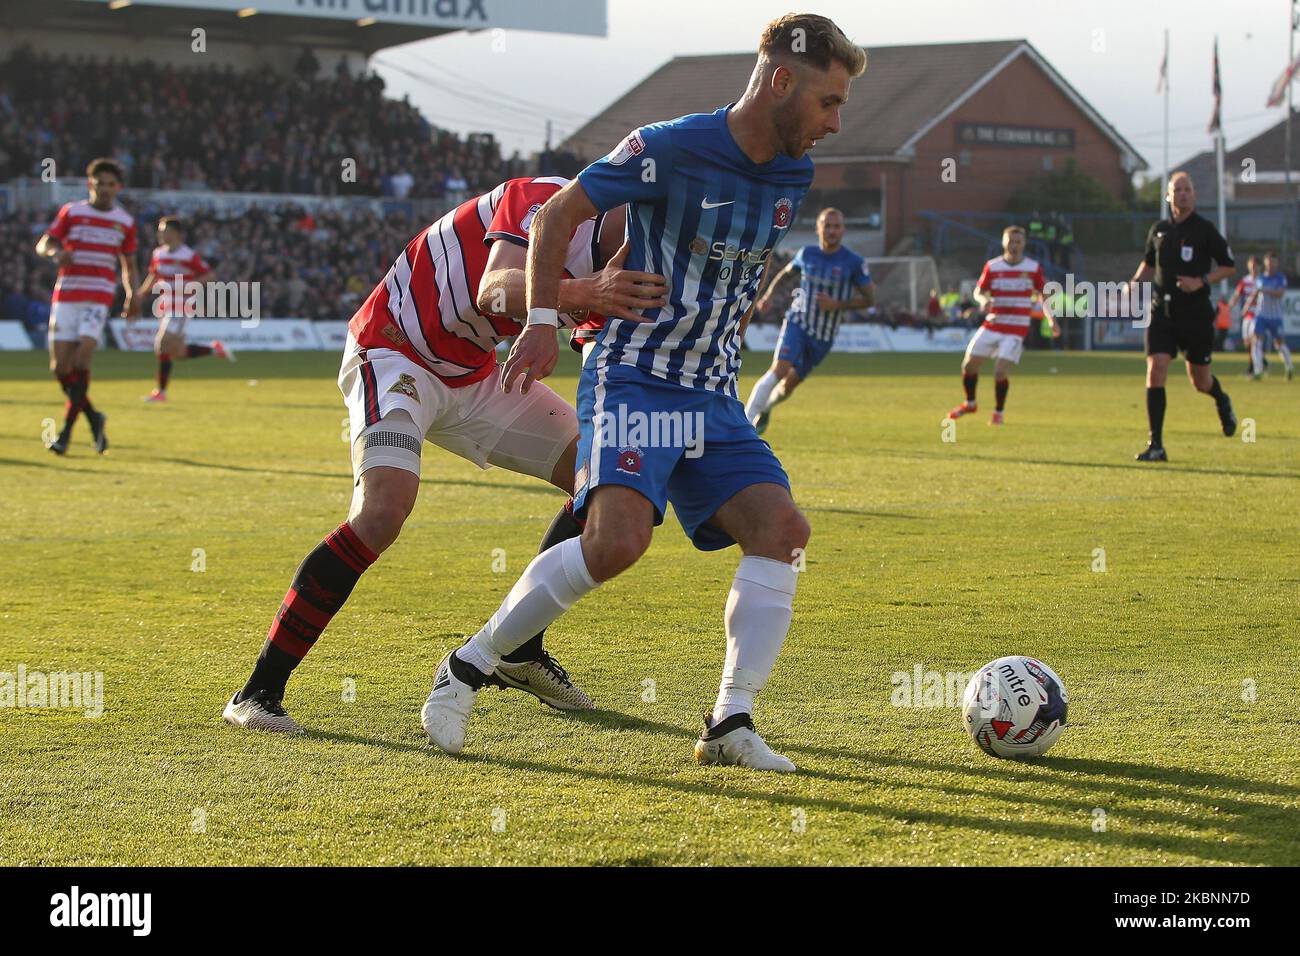 Nicky Deverdics of Hartlepool United in action with Doncaster Rovers' Craig Alcock during the SKY Bet League 2 match between Hartlepool United and Doncaster Rovers at Victoria Park, Hartlepool, UK on 6th May 2017. (Photo by Mark Fletcher/MI News/NurPhoto) Stock Photo